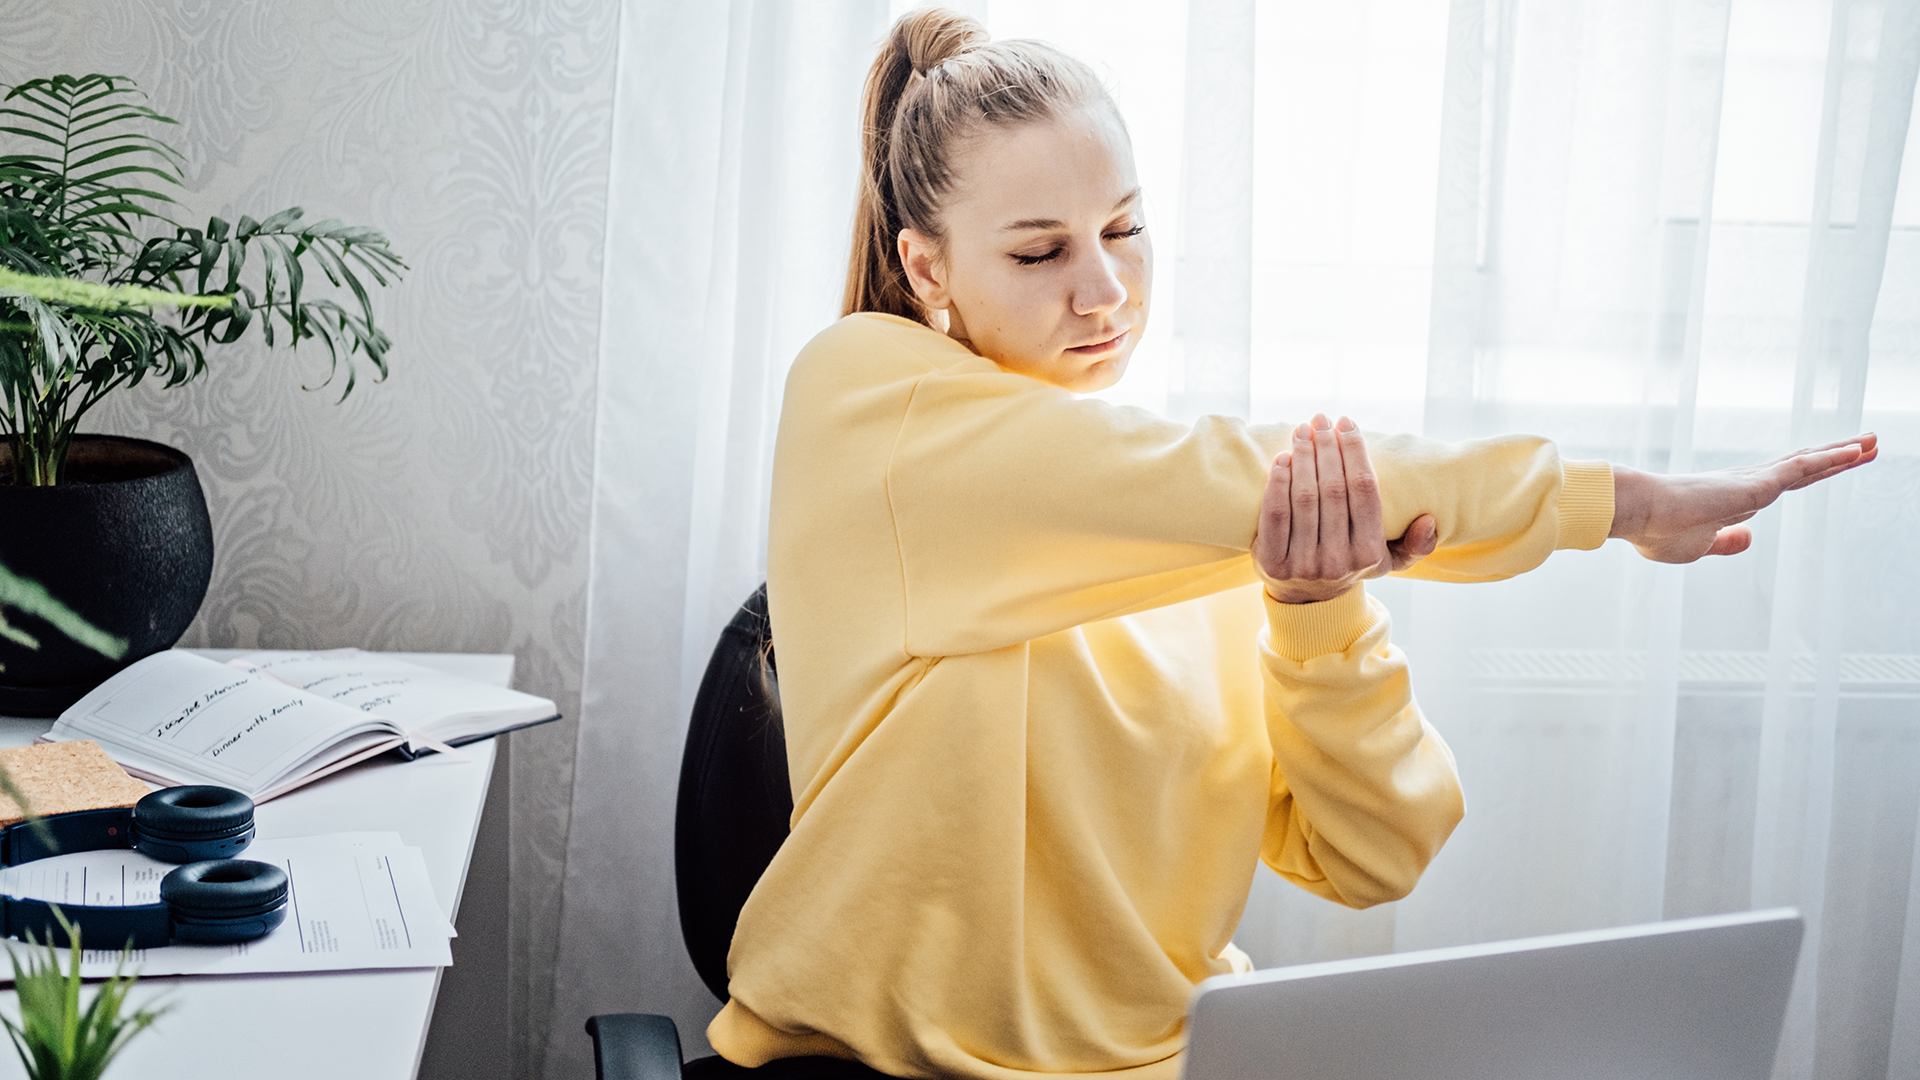 The best desk exercises to do while working from home